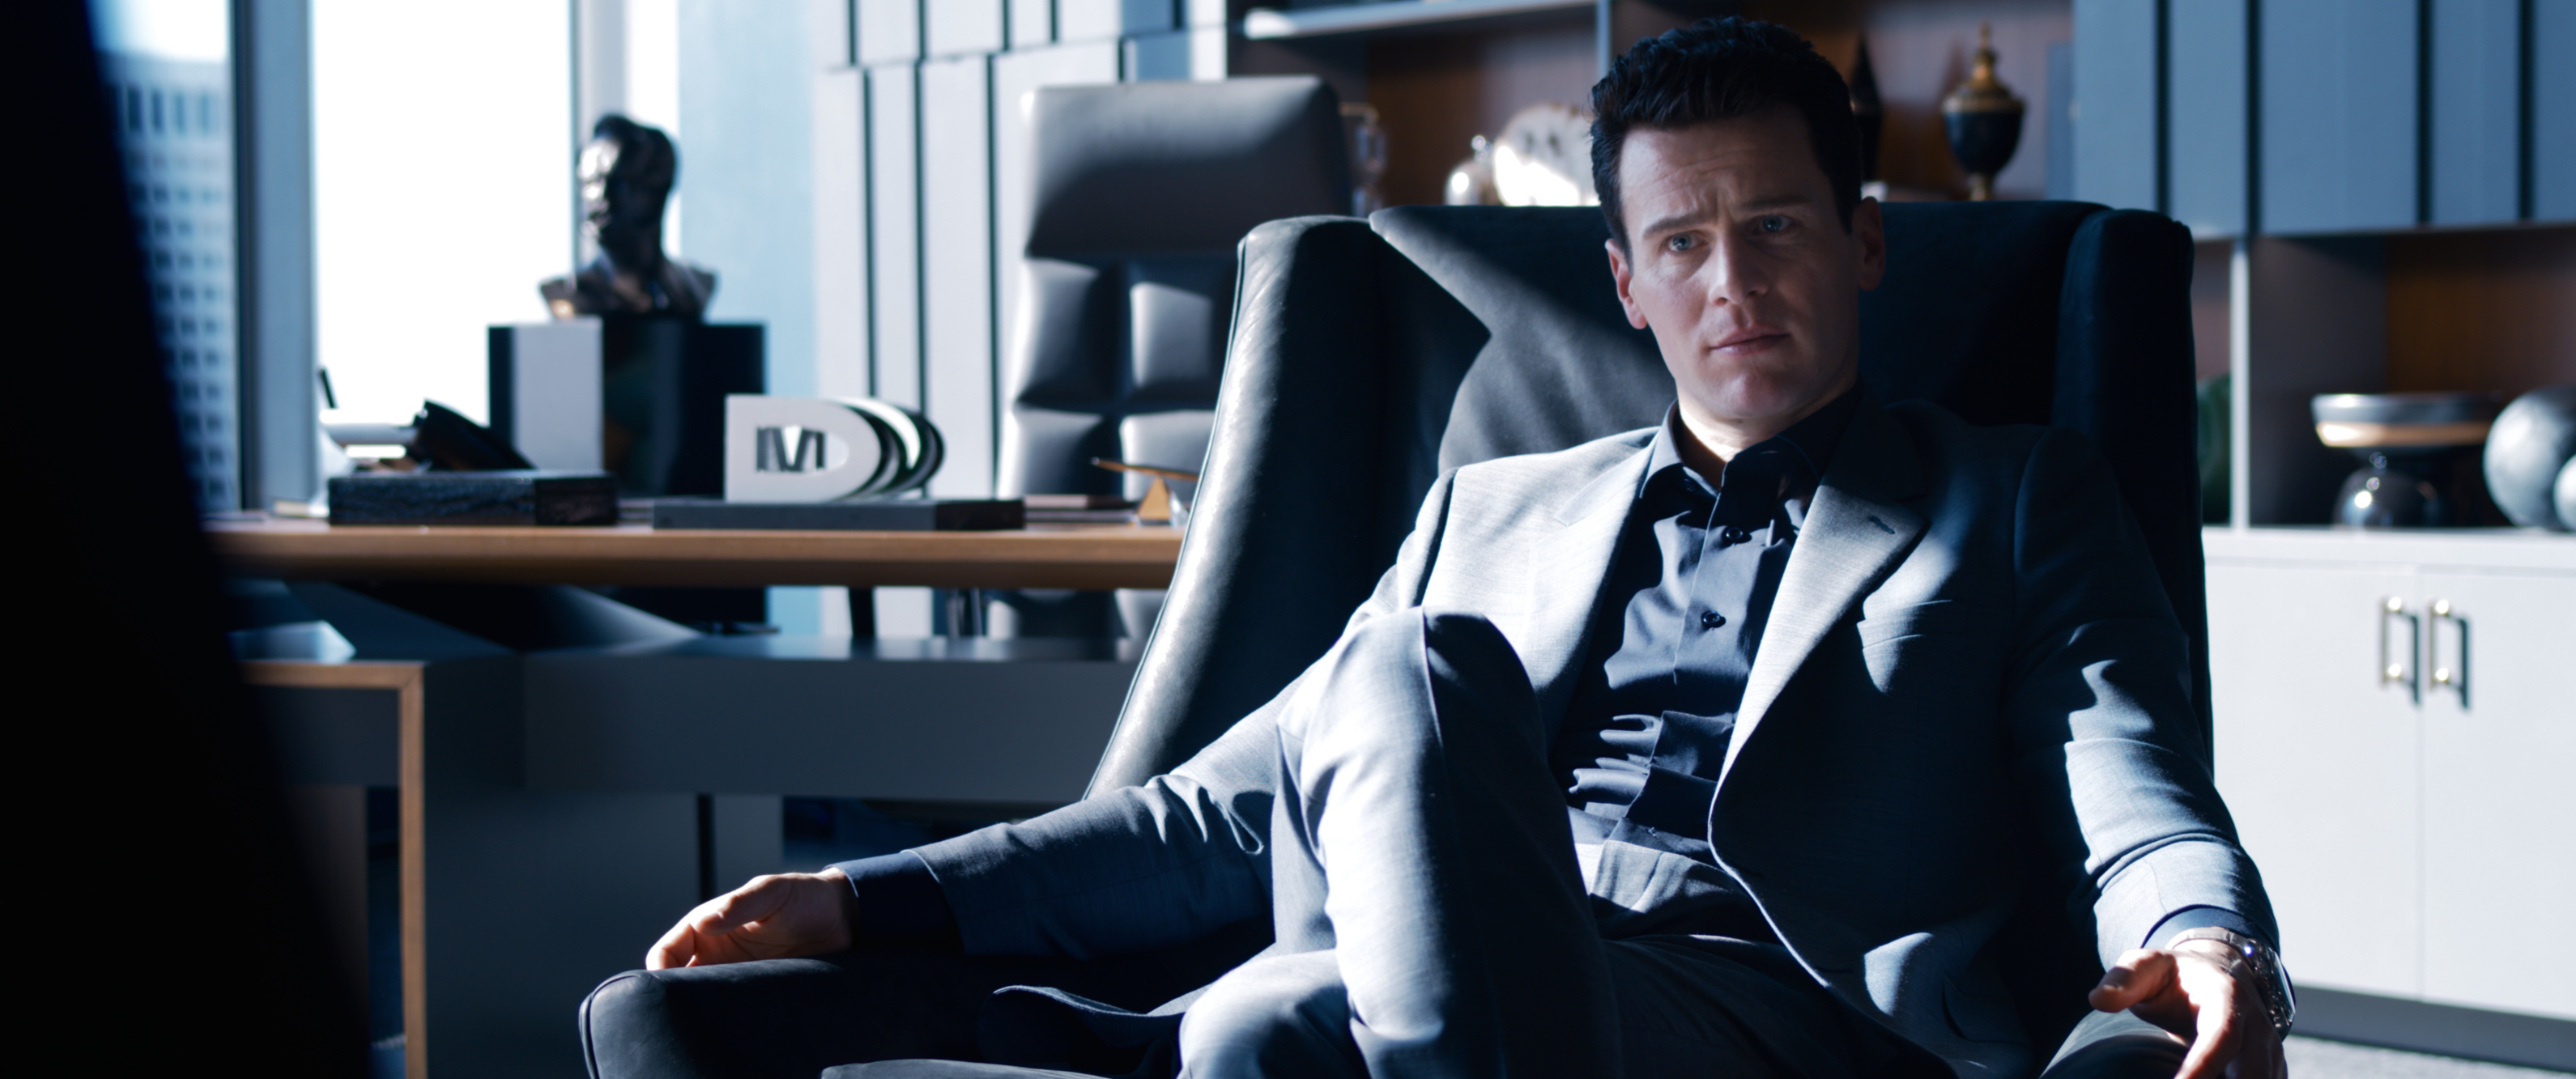 'The Matrix Resurrections' actor Jonathan Groff as Agent Smith wearing a suit sitting in a leather chair